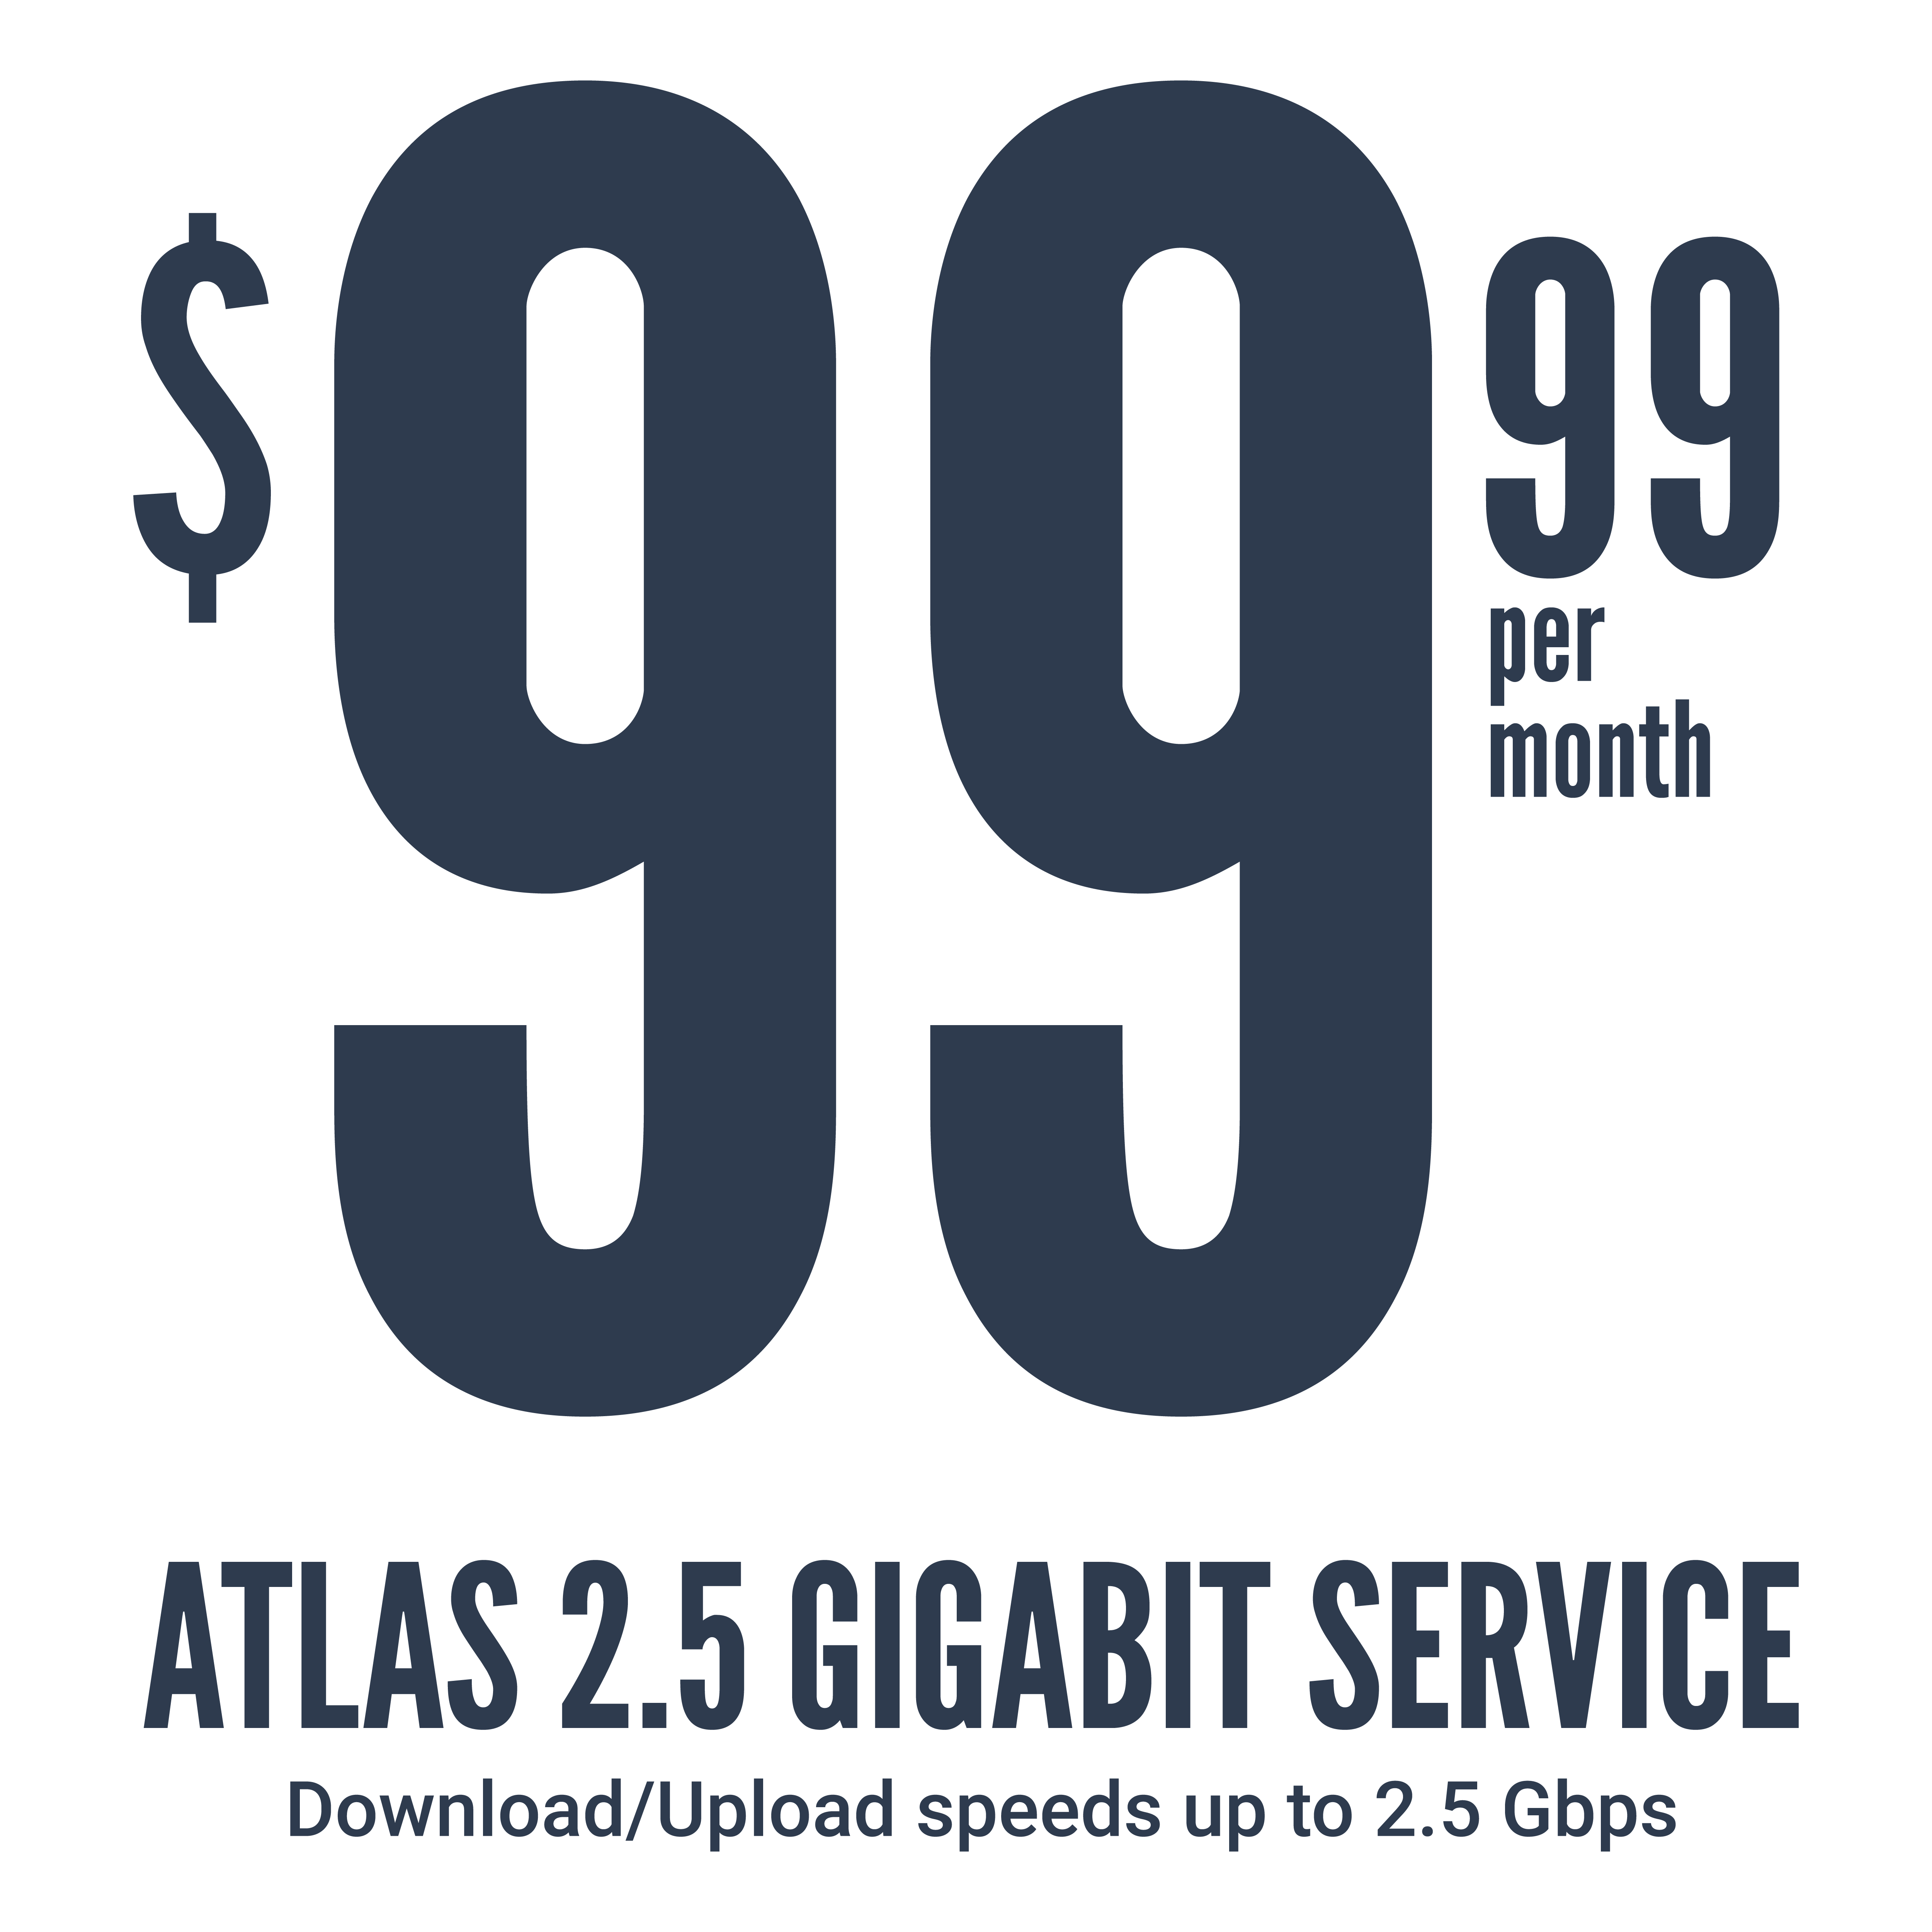 Large image of Atlas Networks' prices for 2.5Gbps residential internet, $99.99 per month